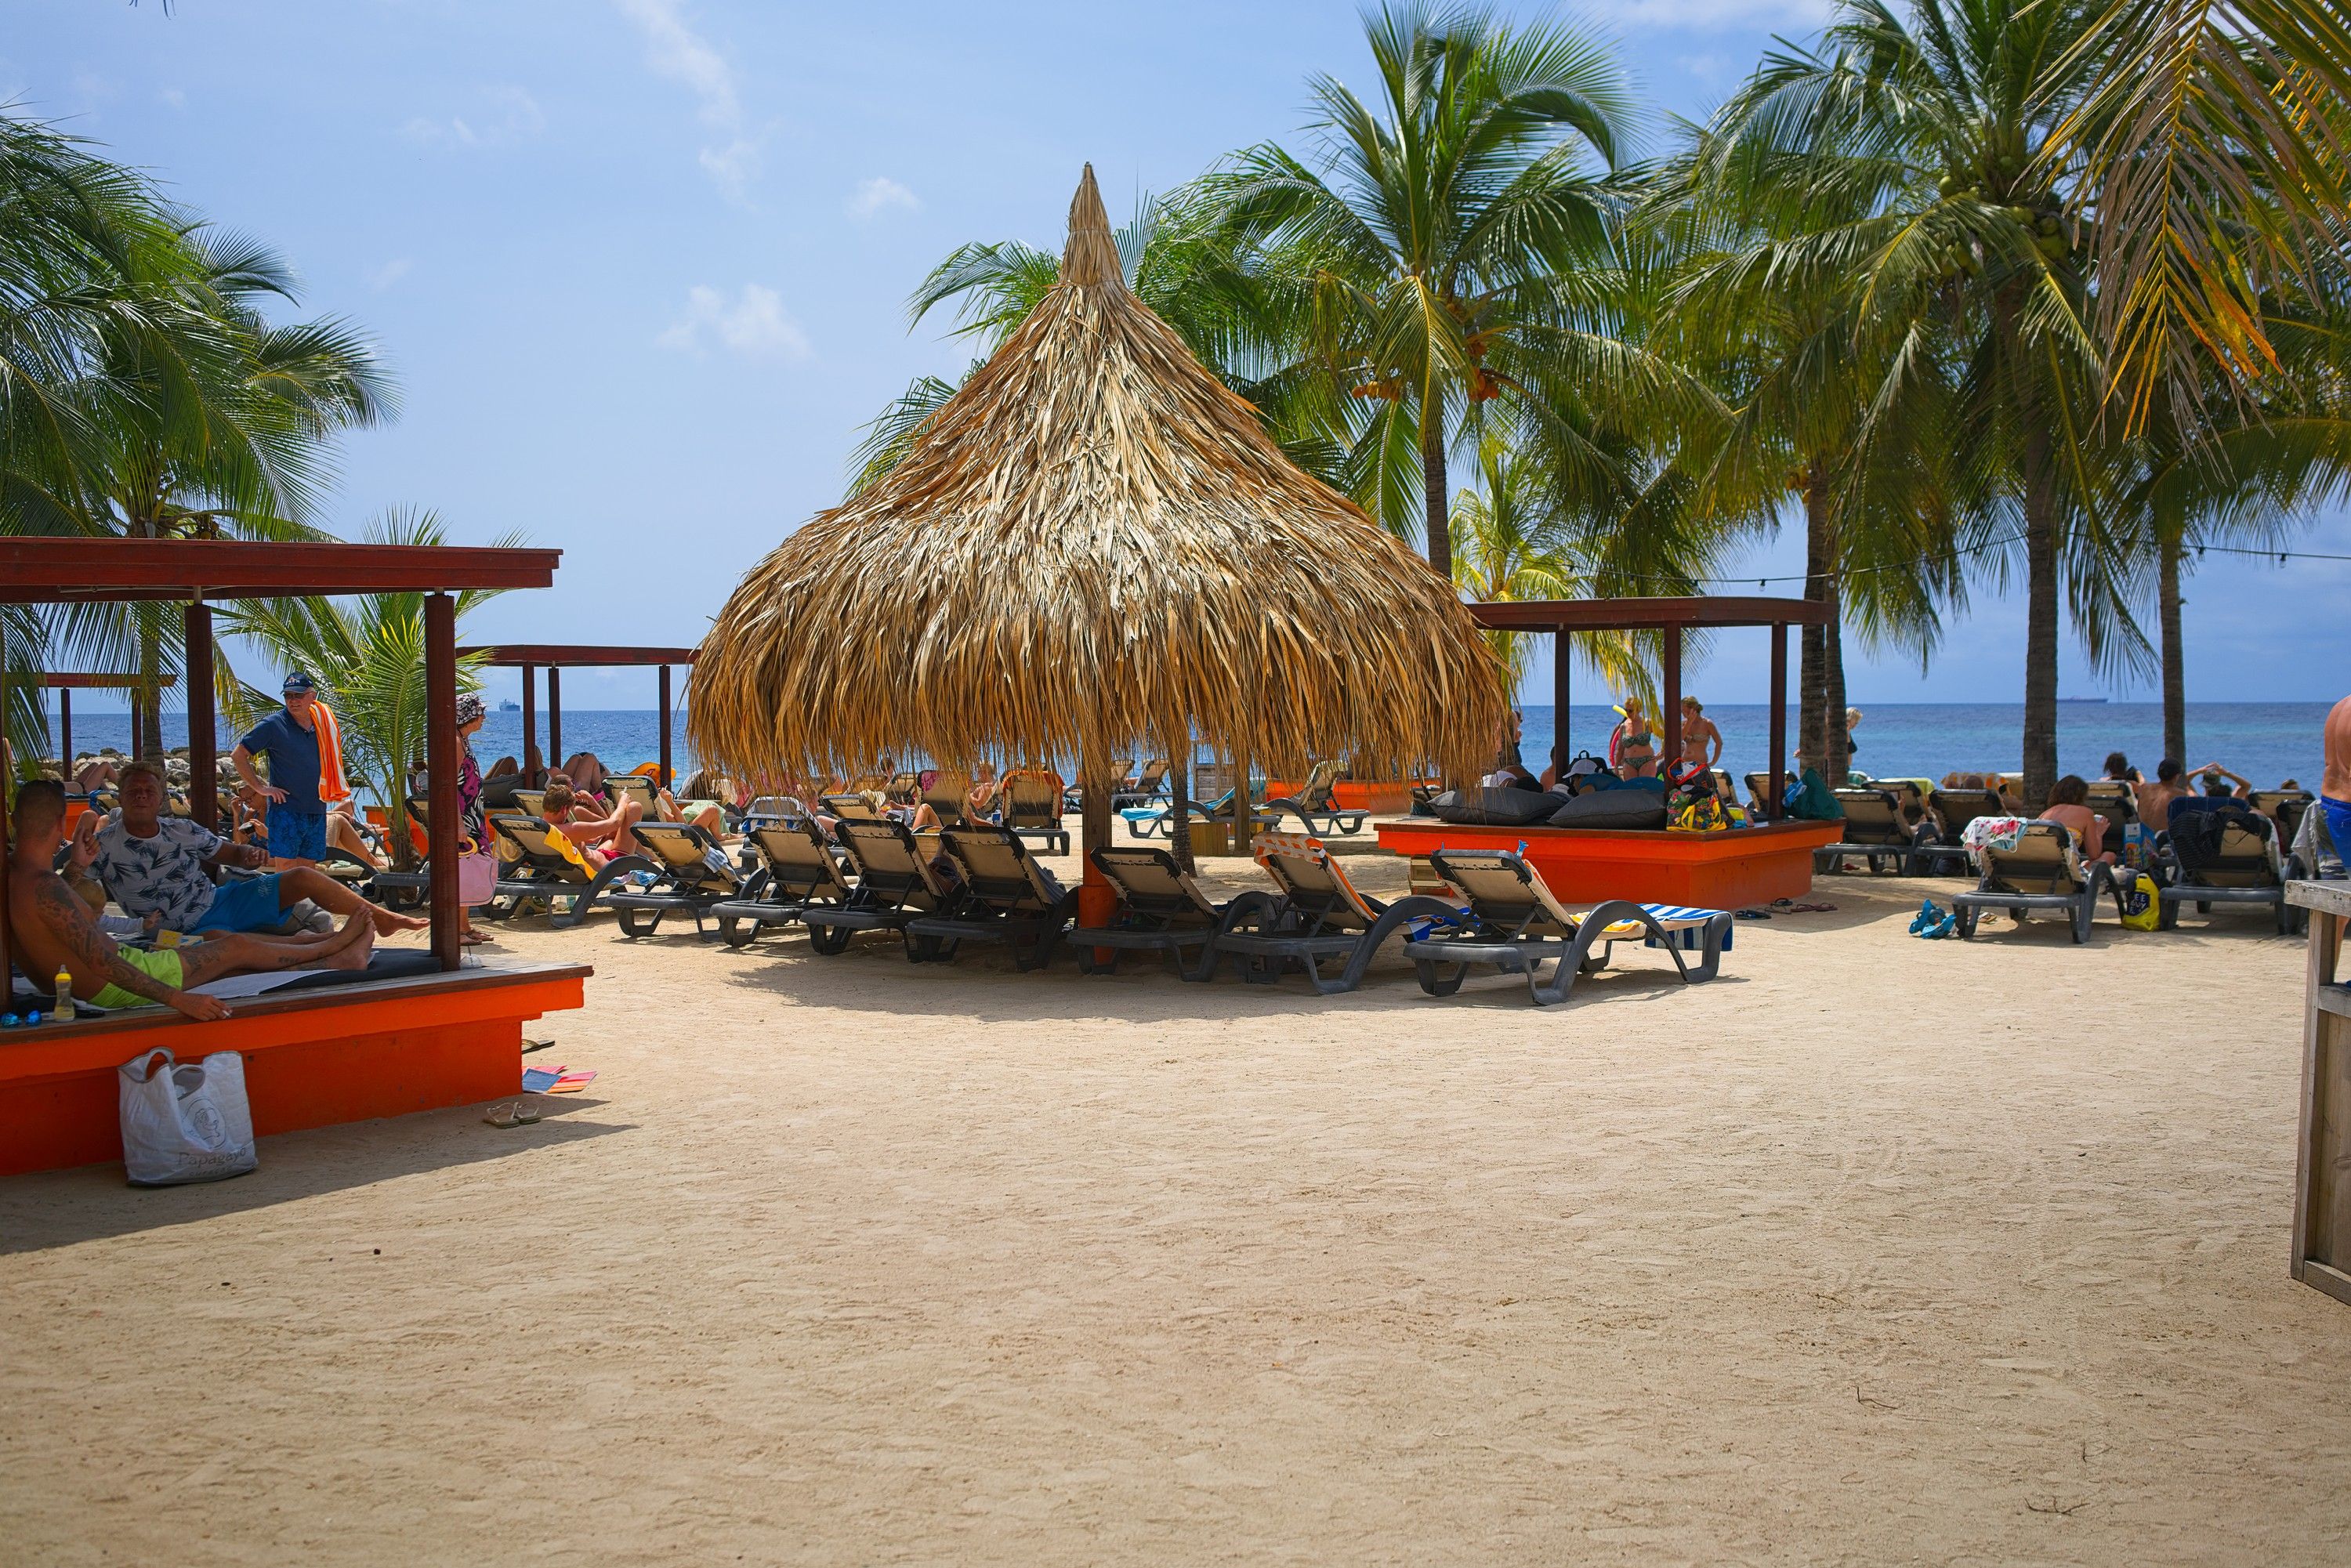 Busy beach scene at Jan Thiel Beach, Curacao, featuring vacationers relaxing under a large thatched umbrella and palm trees, with ocean views in the background.